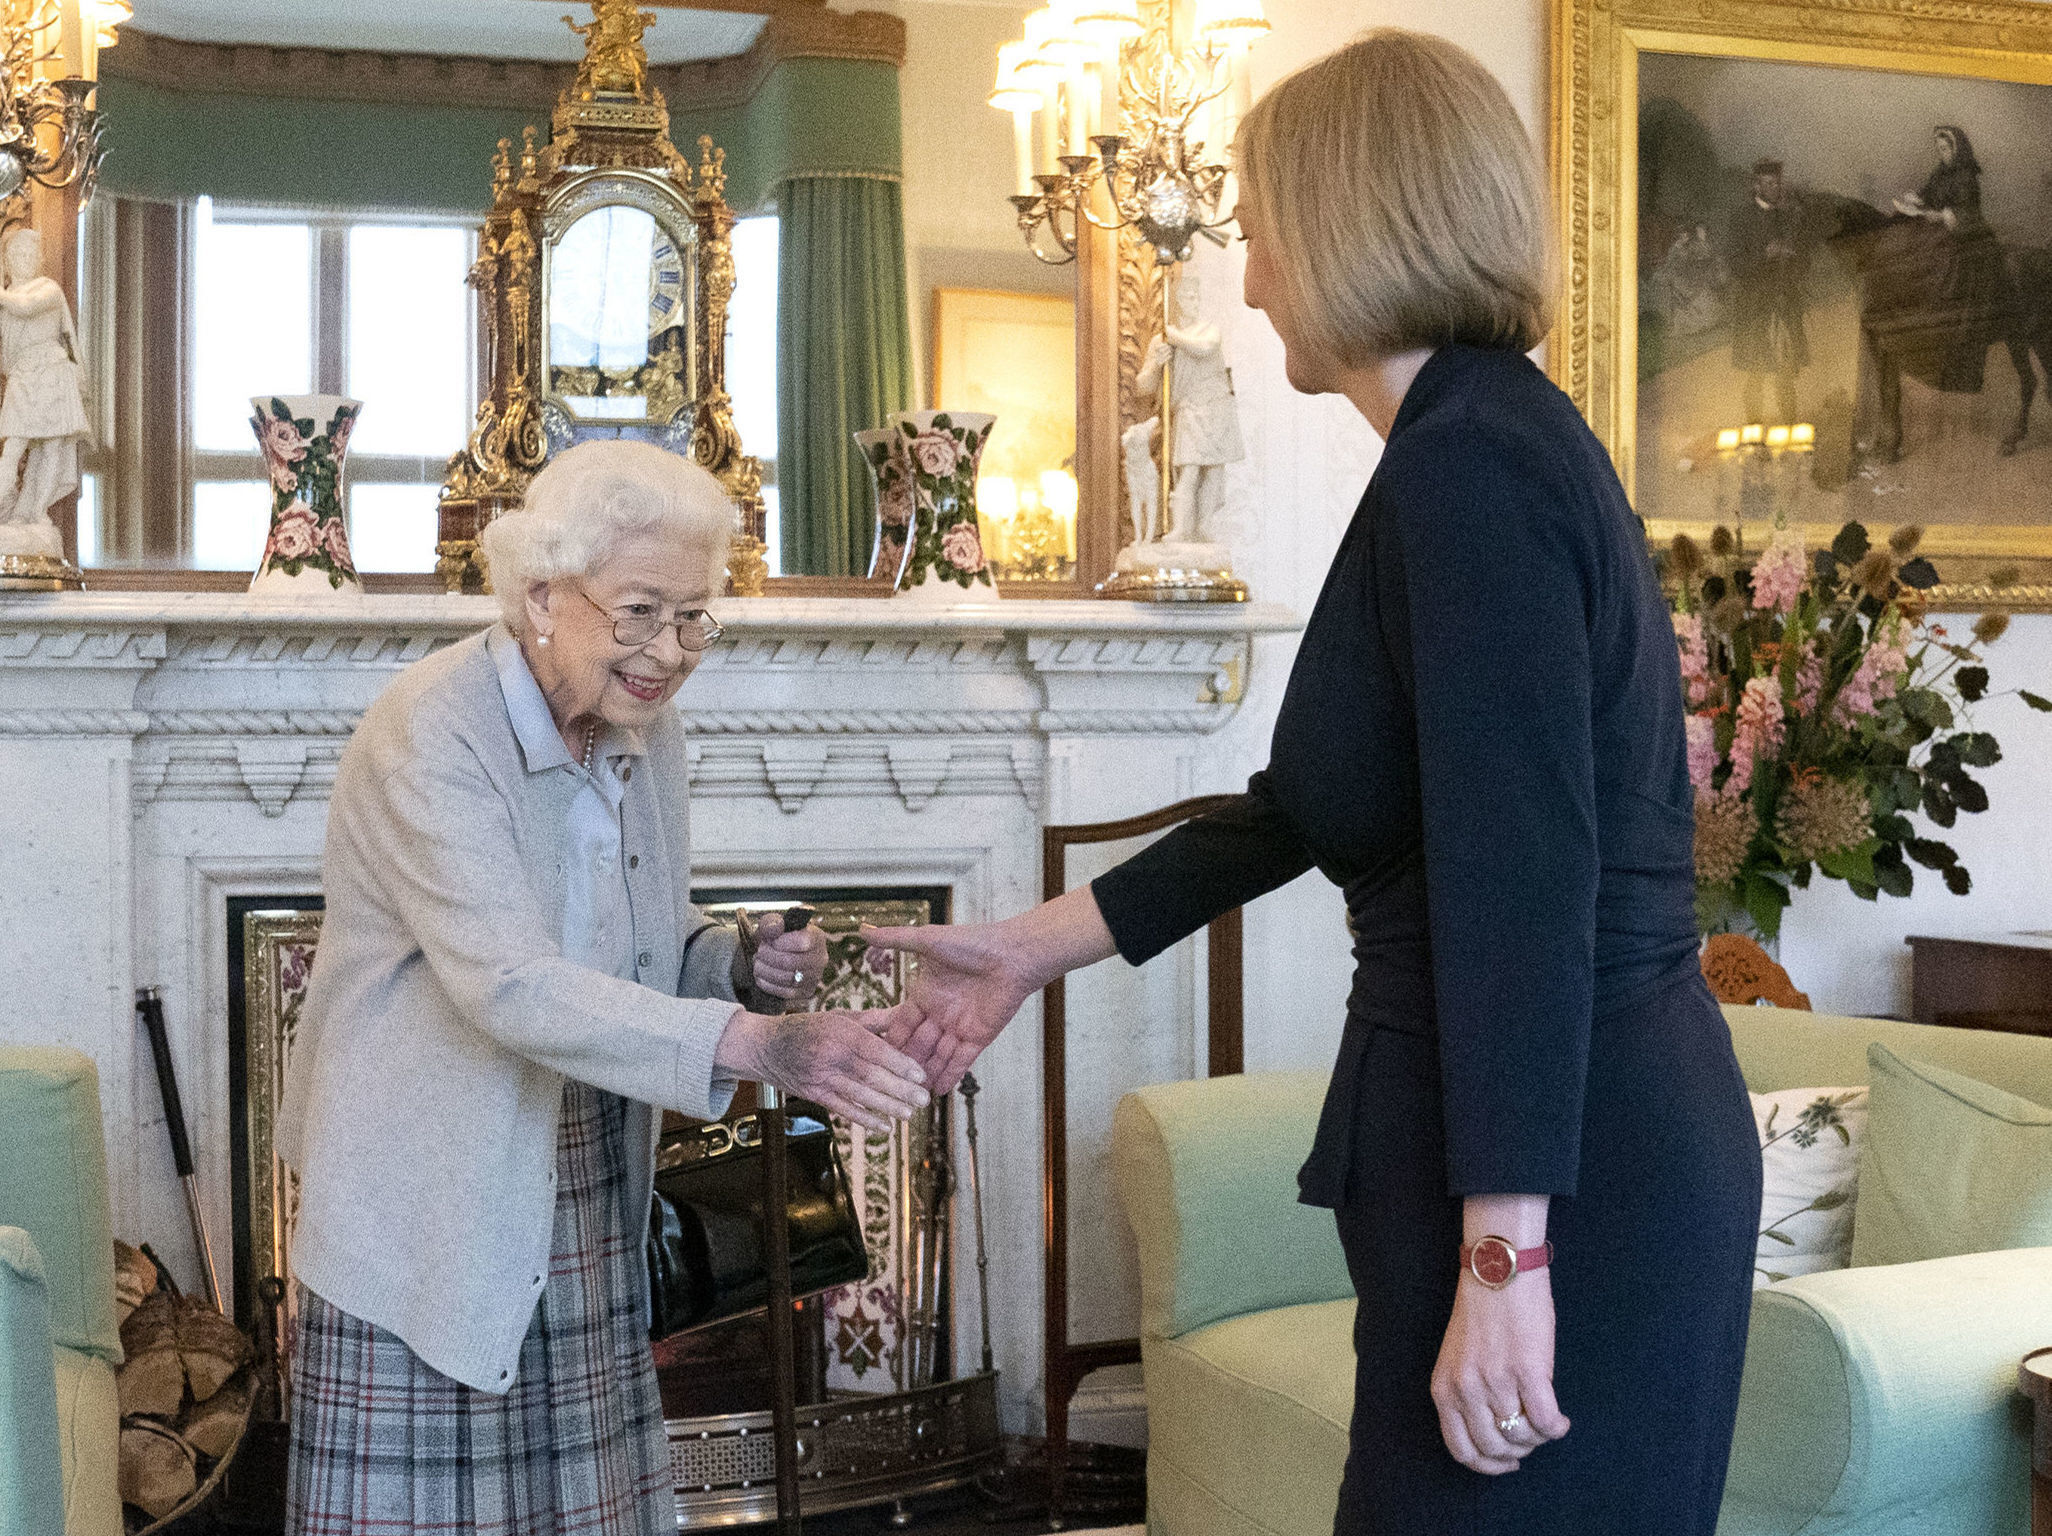 The Queen welcomes Liz Truss at Balmoral, Scotland, where she invited the newly elected leader of the Conservative party to become Prime Minister and form a new government on September 6.